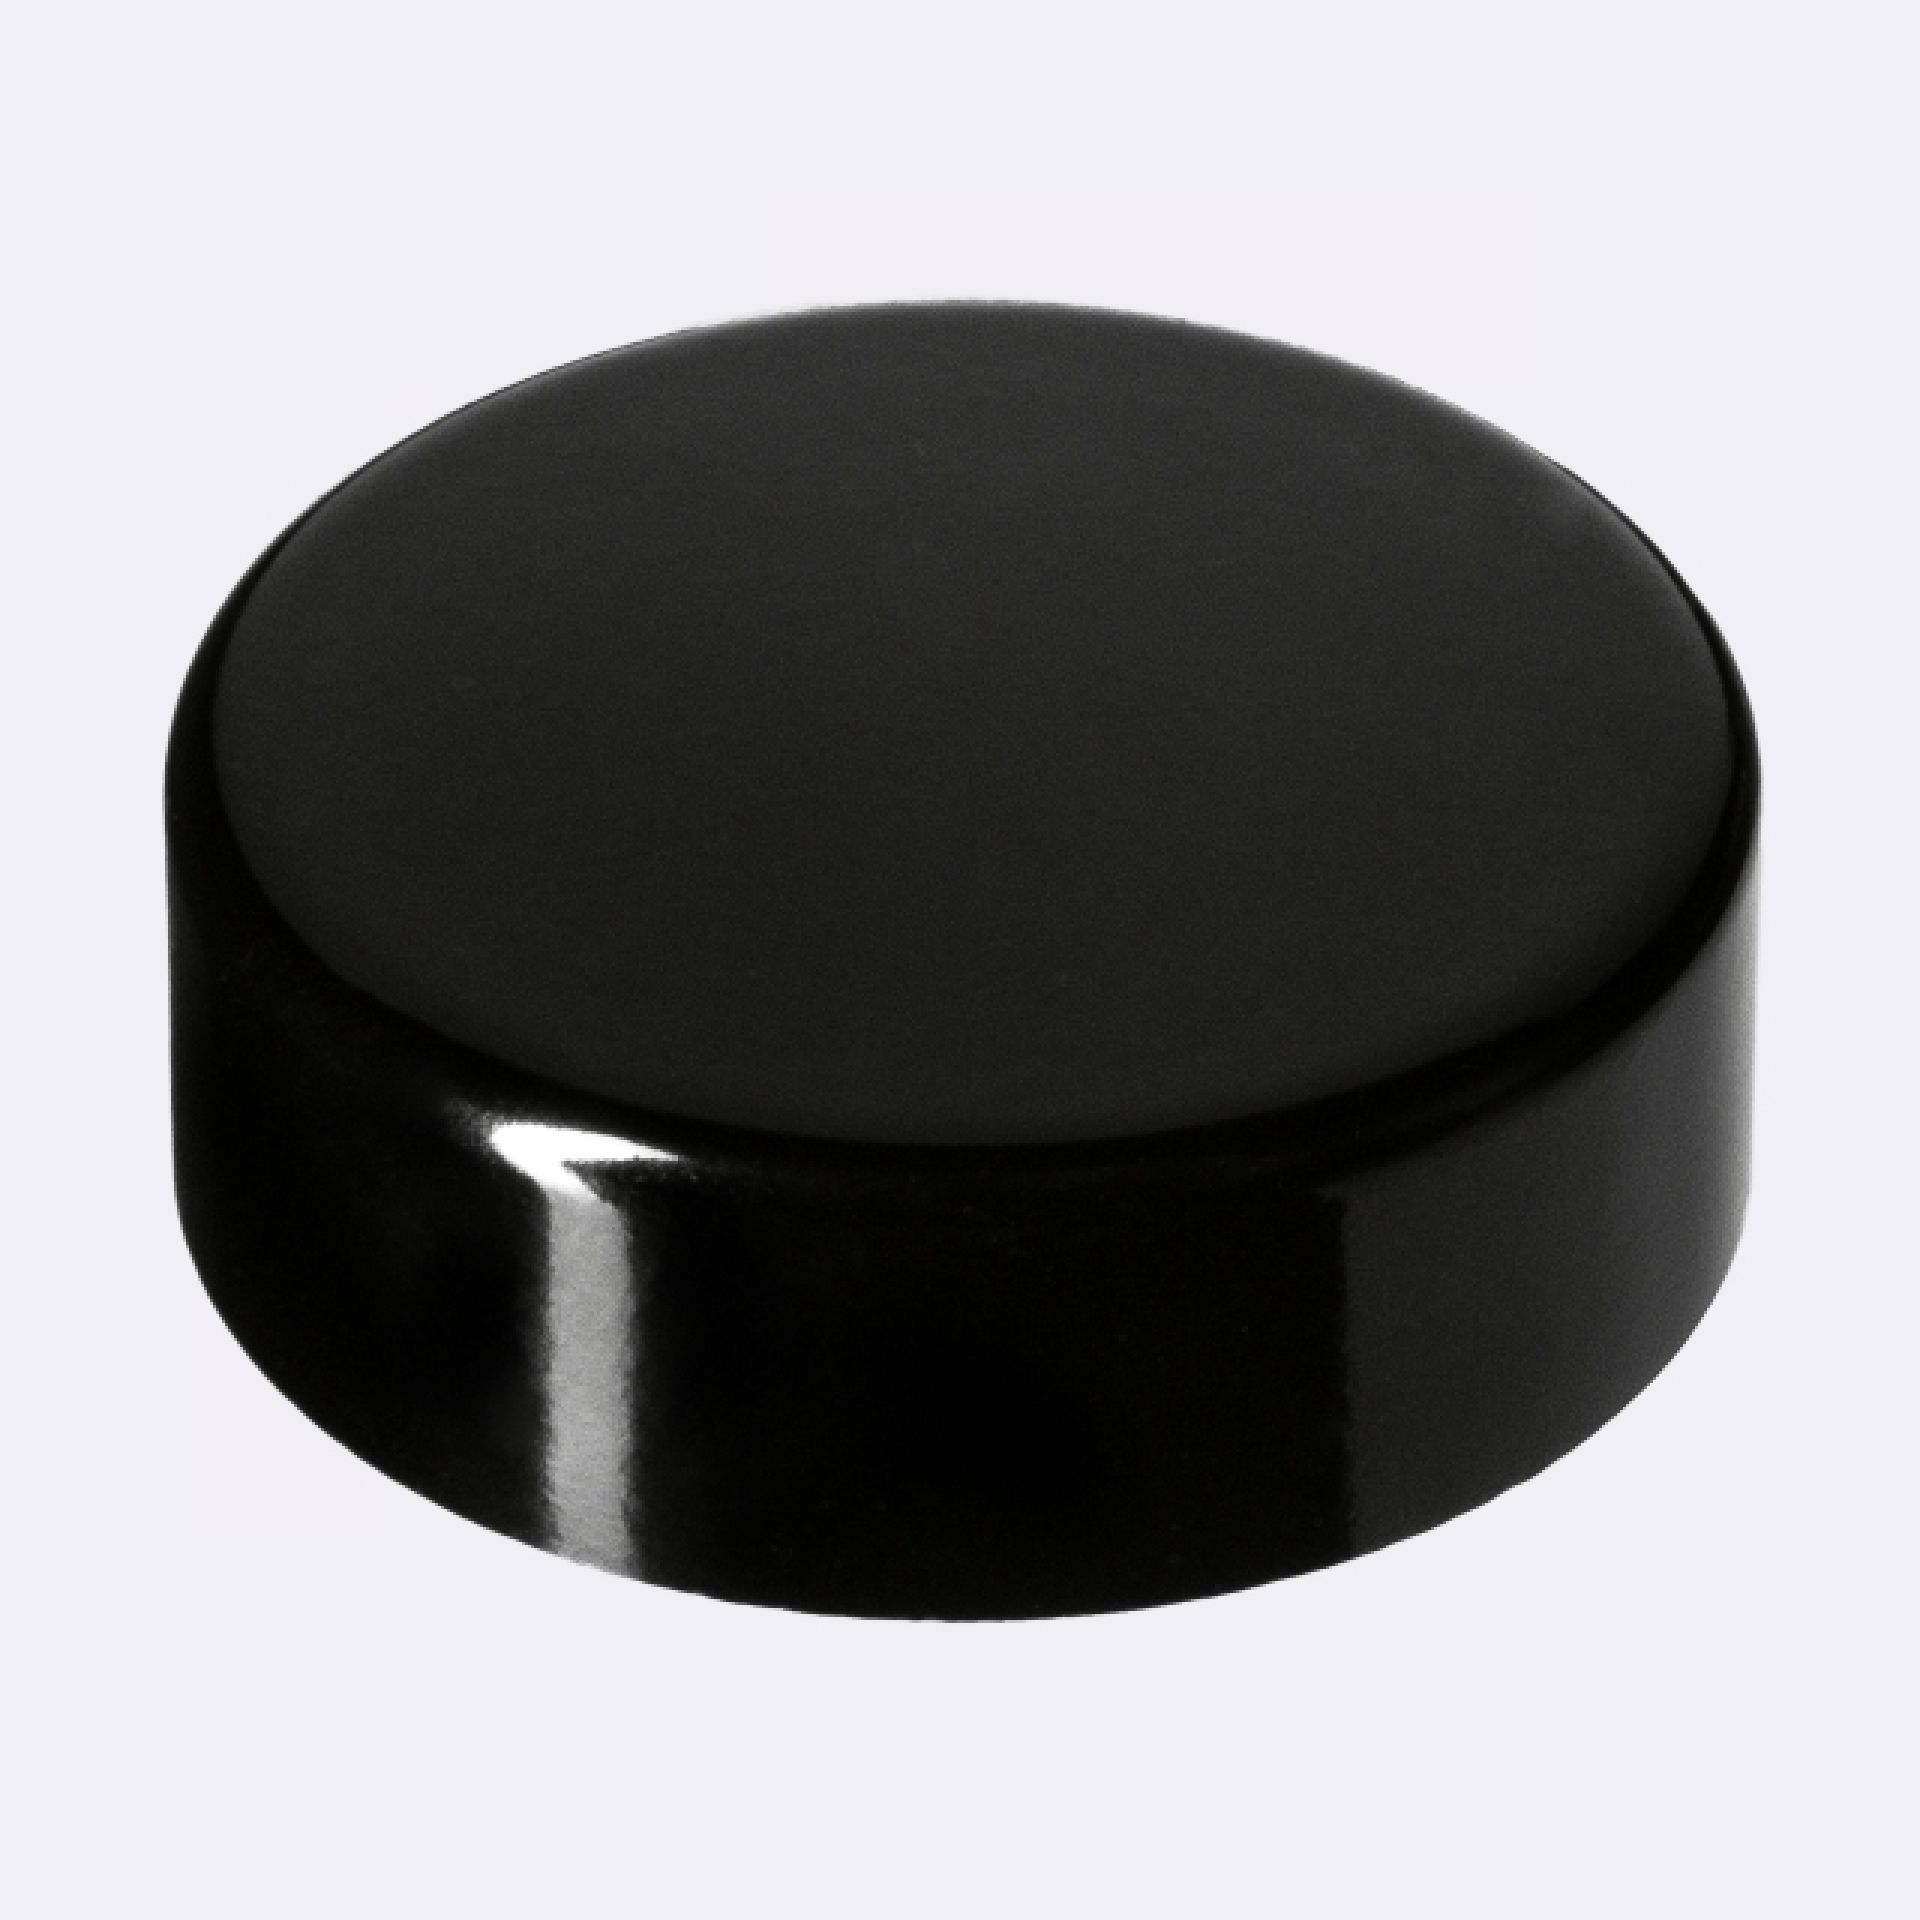 Lid Modern 34 special, UREA, black, semi-glossy finish, violet Phan inlay (Ceres 10)